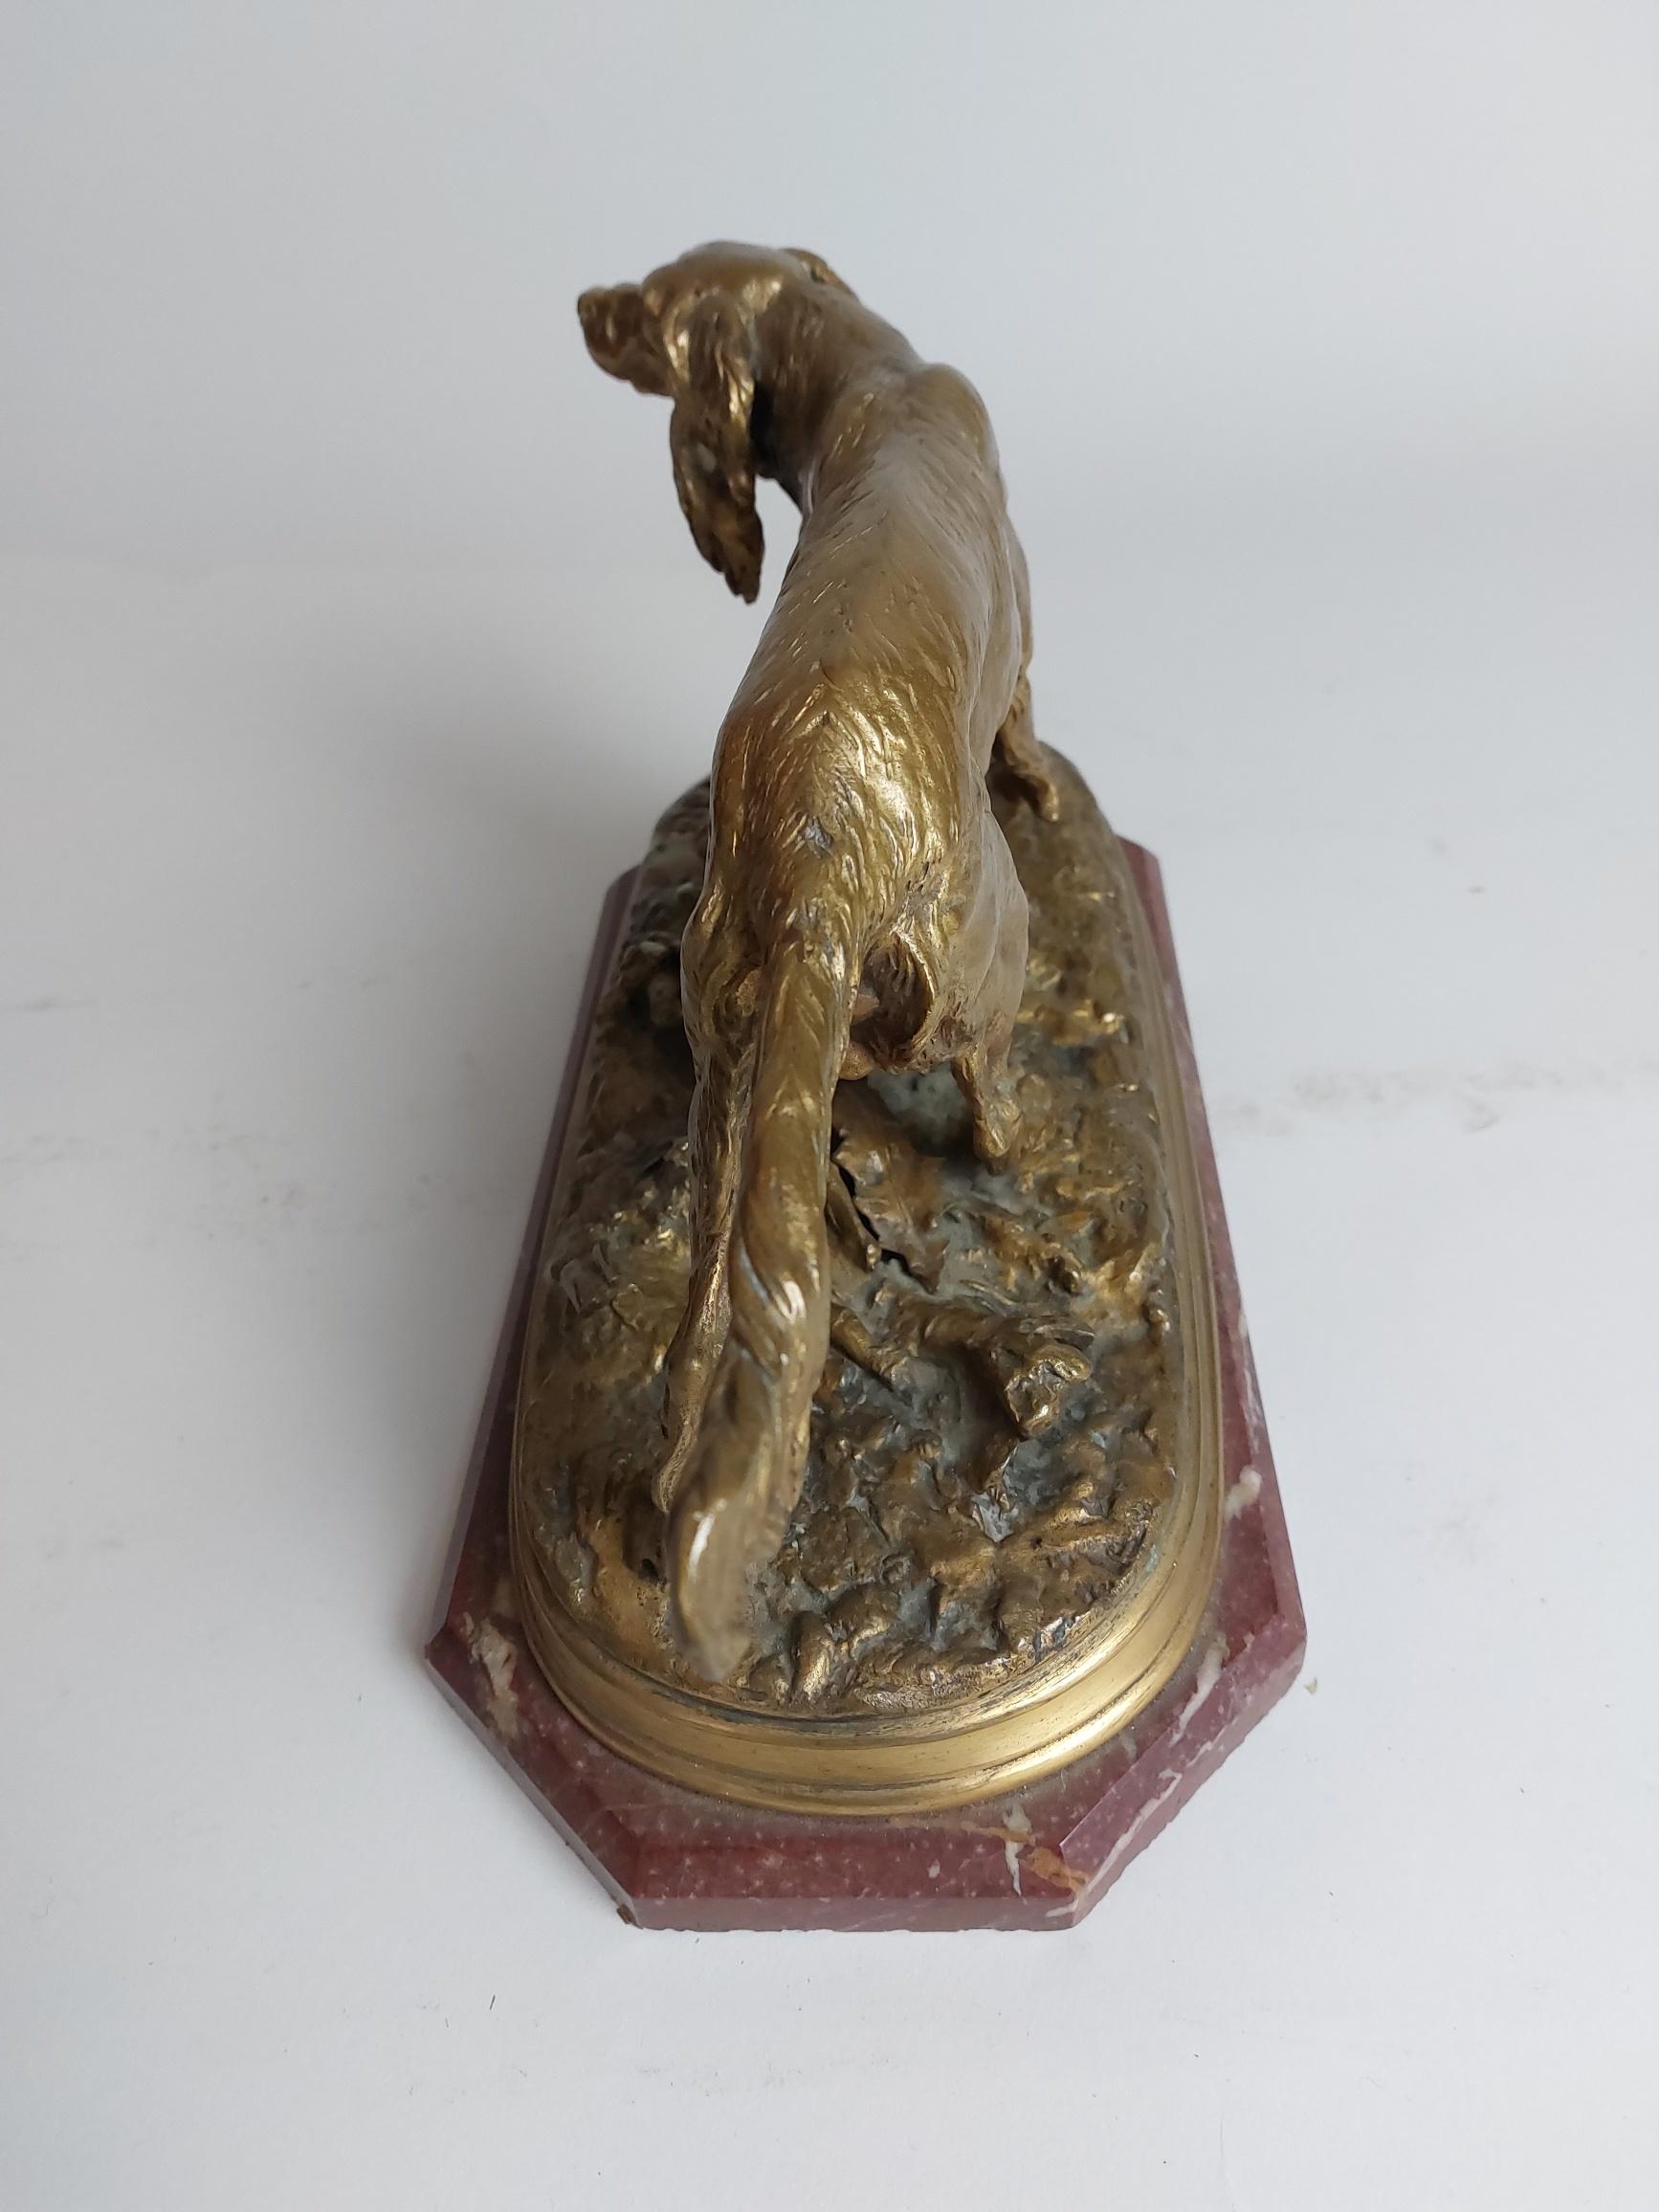 A 19th century French bronze of a spaniel/setter type dog. Signed P J Mene

A beautifully modelled portrait study of a dog it looks up from it looks up keenly towards it’s master.
On a marble base.

Pierre-Jules Mene (1810-1879)
Mene was a